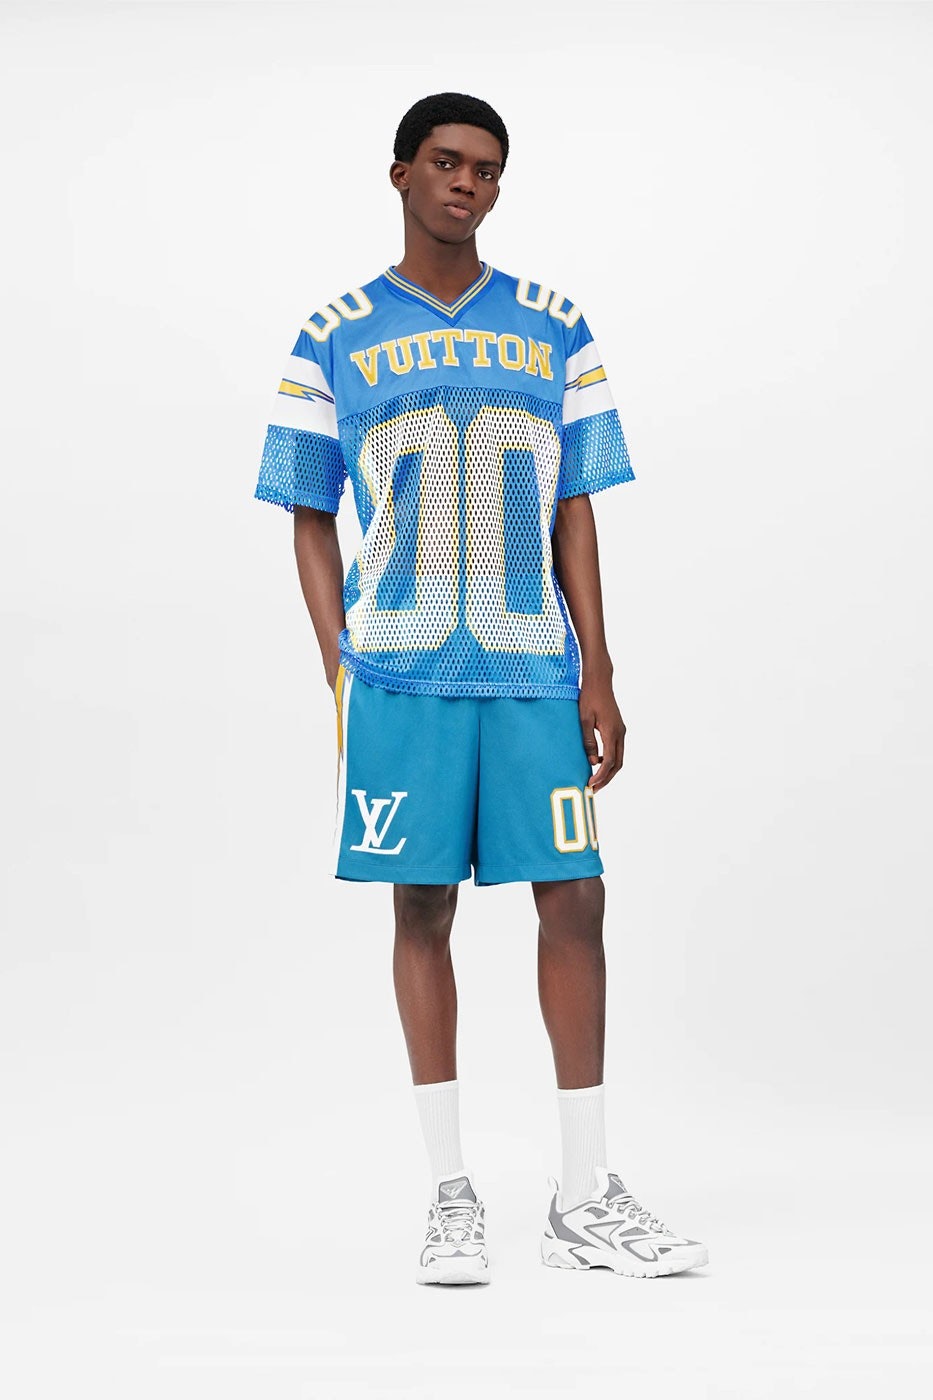 replica la chargers jersey football